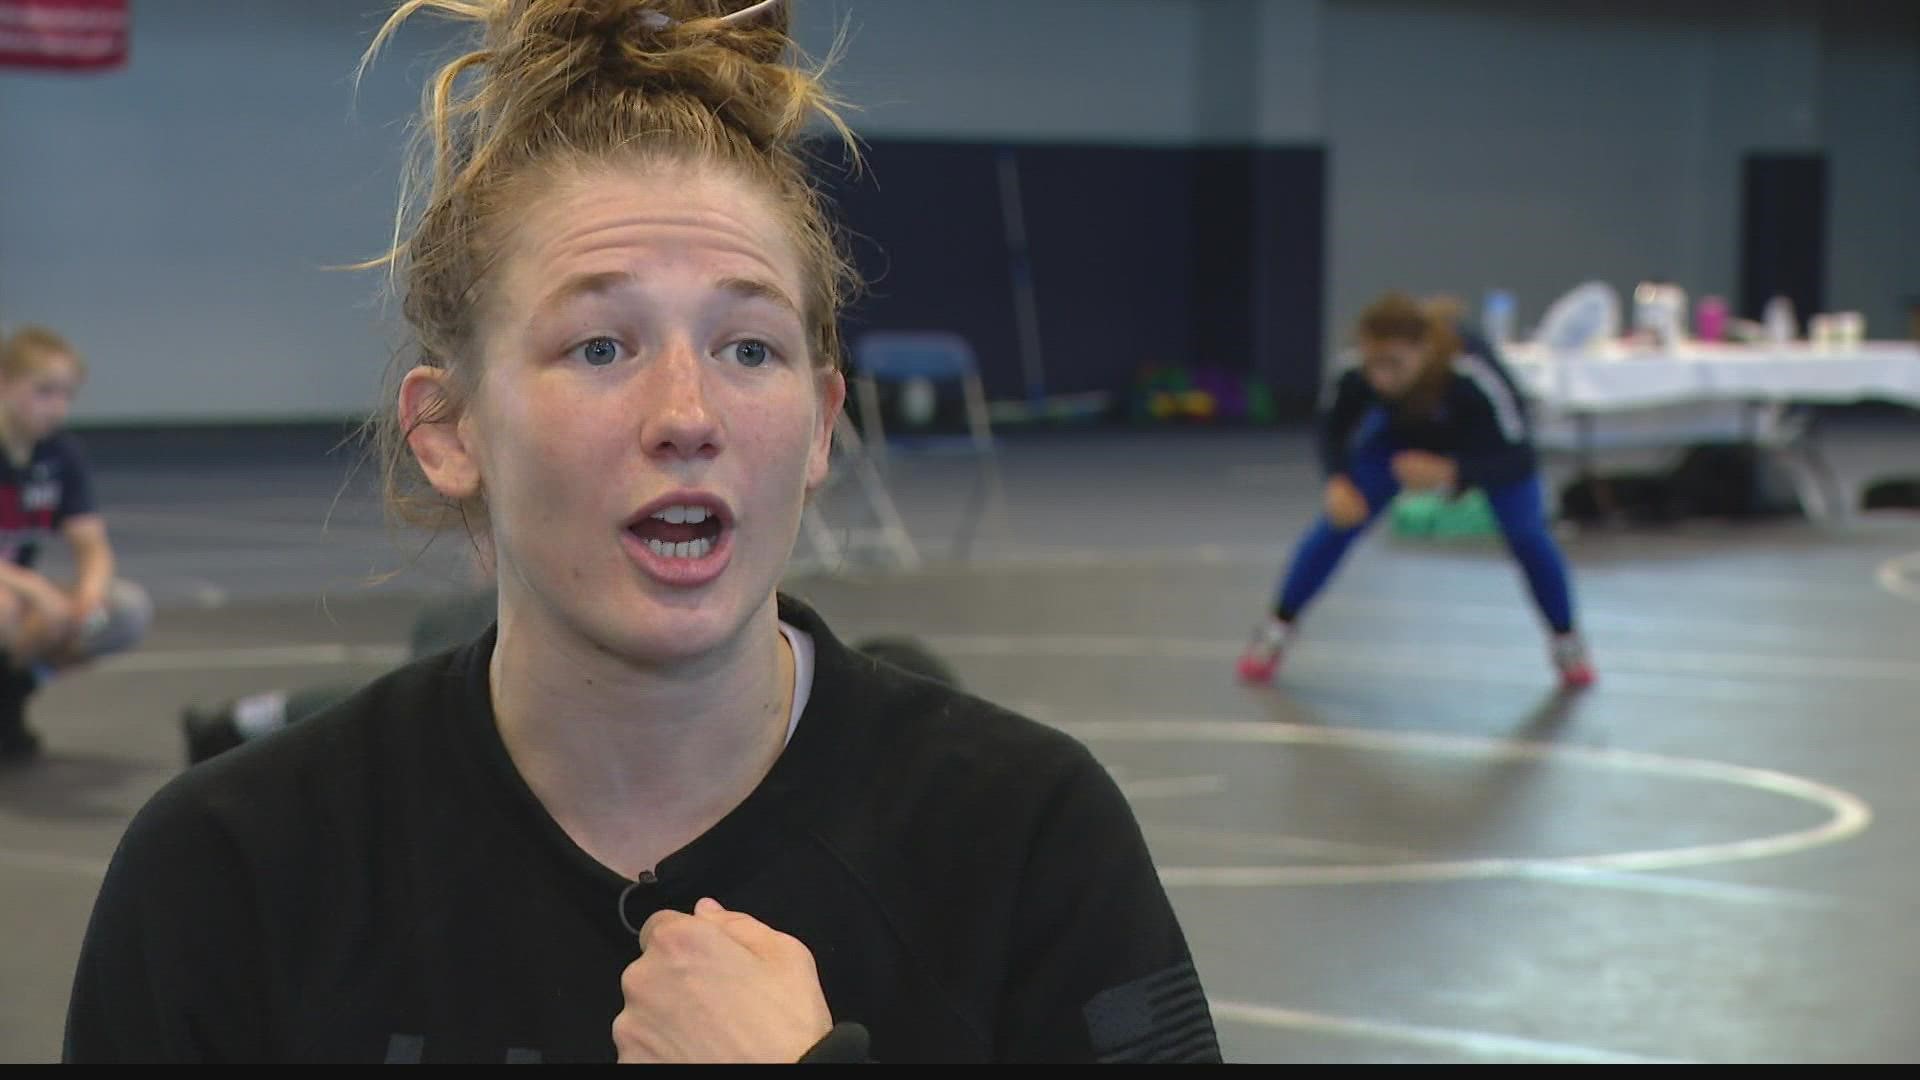 The 27 year old started wrestling in junior high school because her brothers loved the sport.